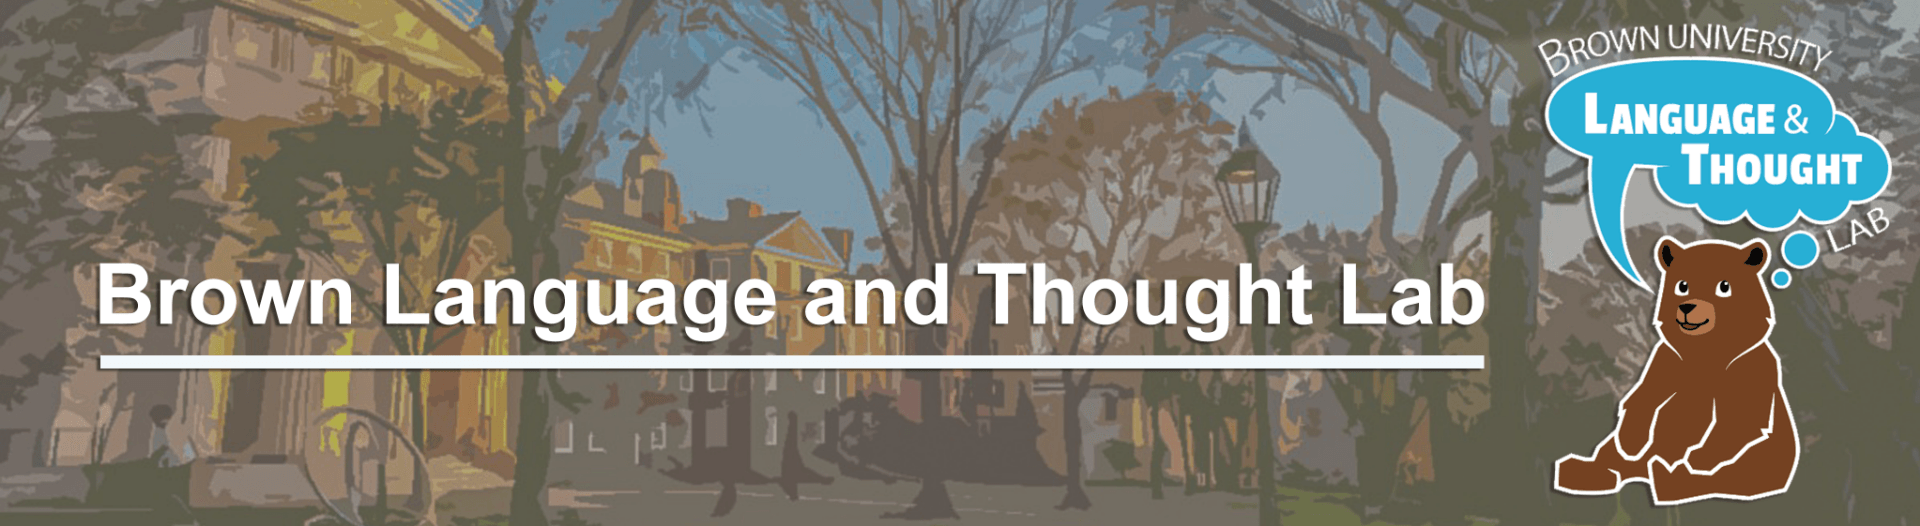 Brown Language and Thought Lab